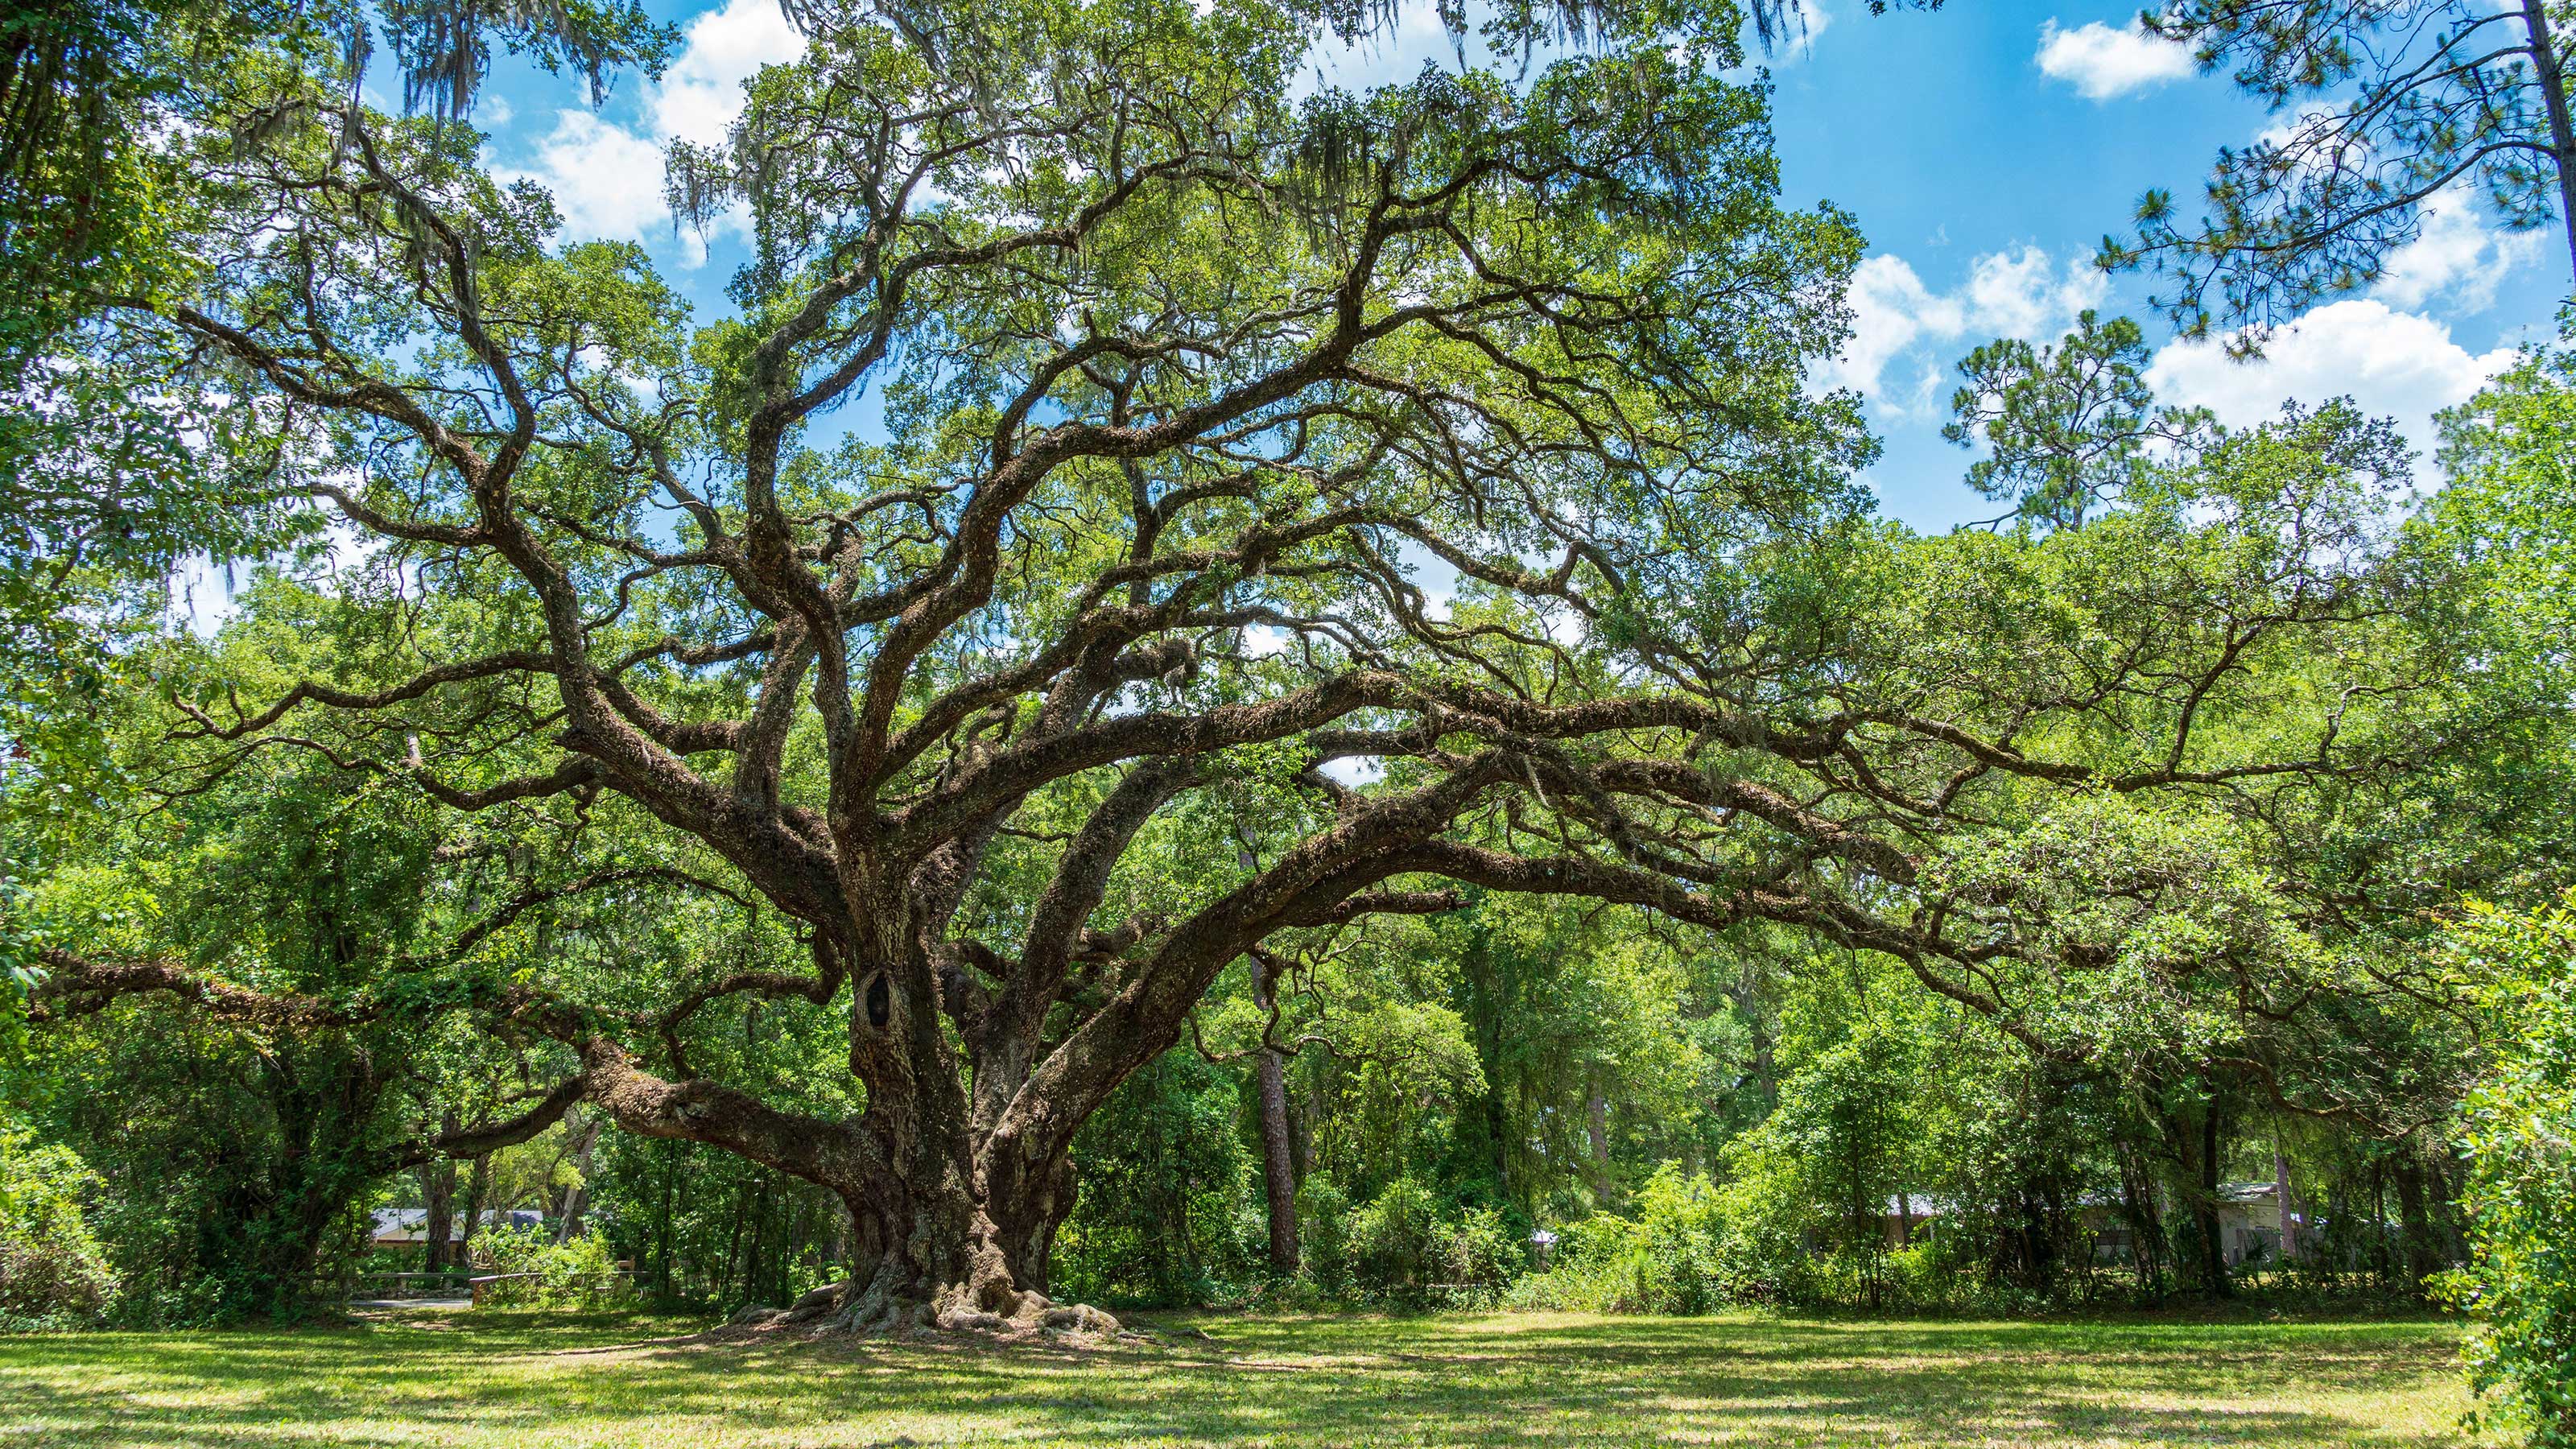 Live oak care and growing guide: tips for these trees | Gardeningetc